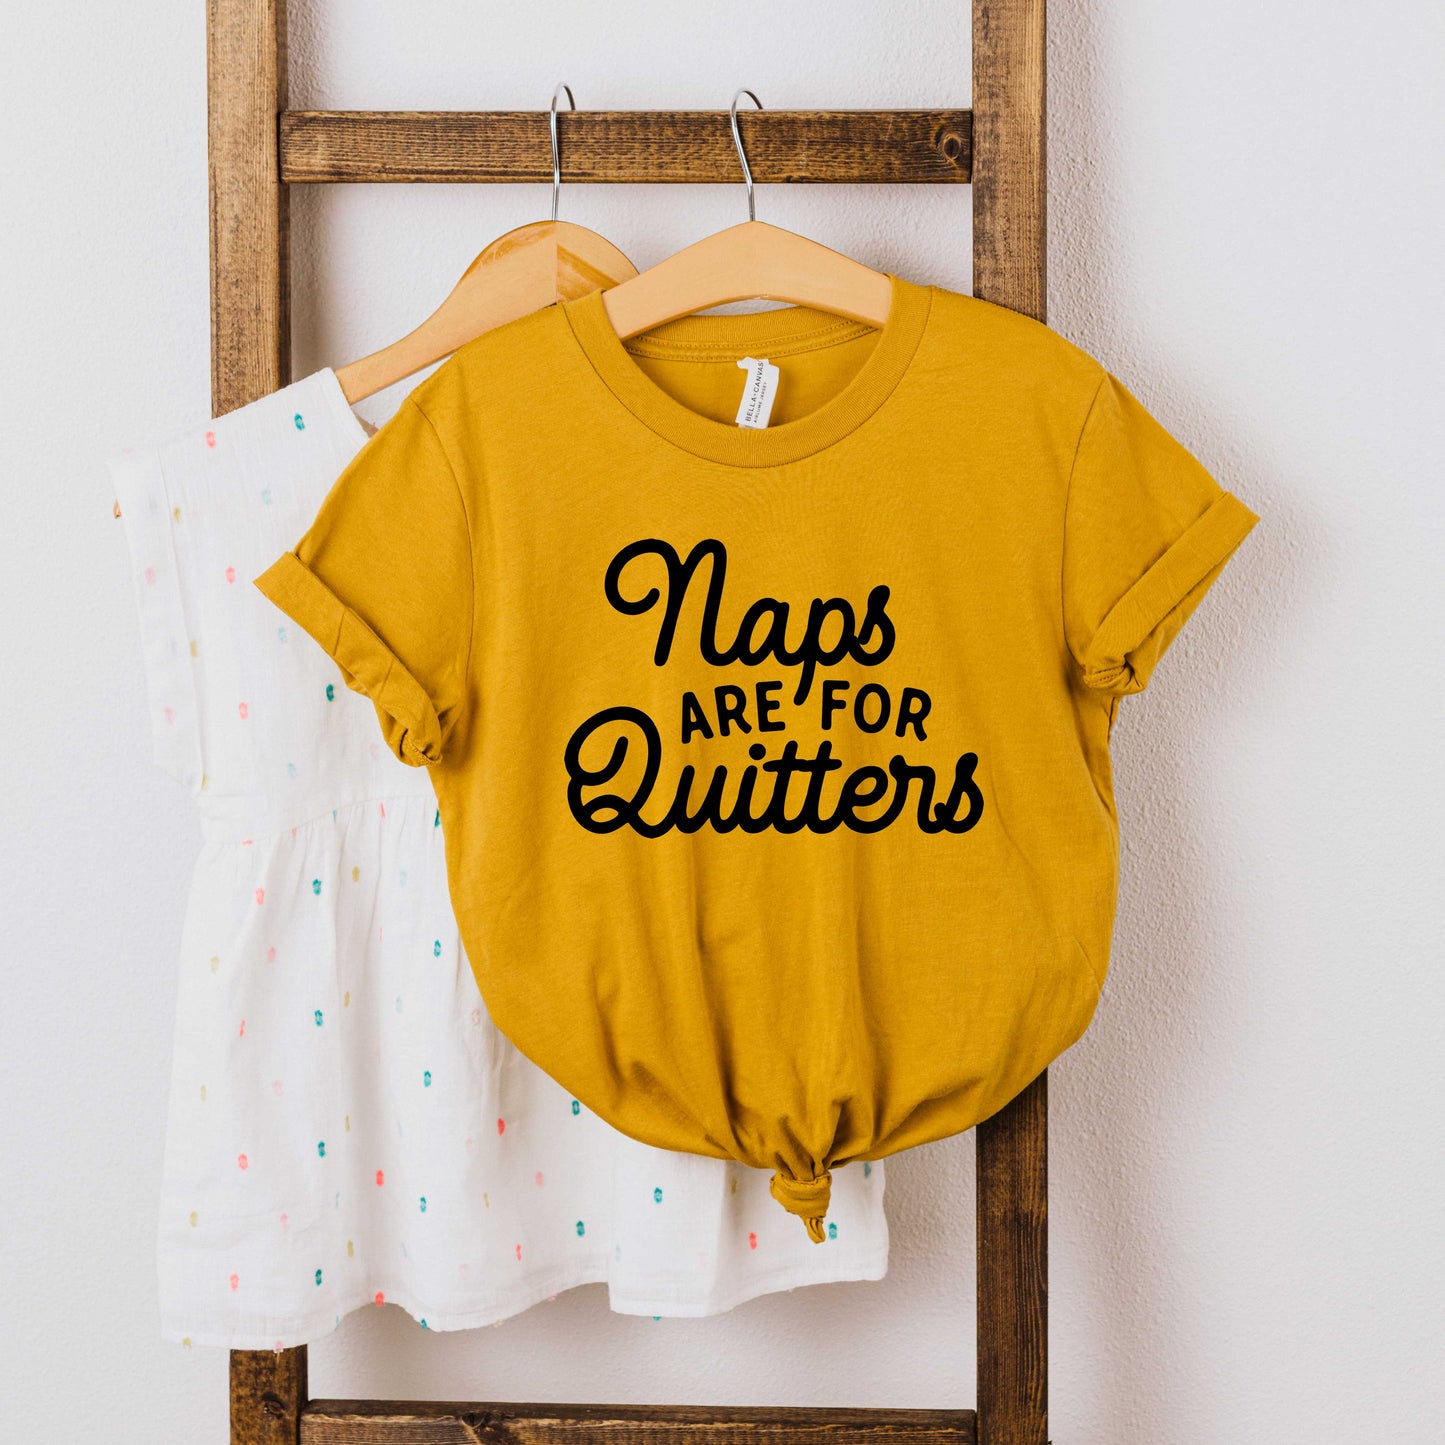 Naps Are For Quitters | Youth Short Sleeve Crew Neck